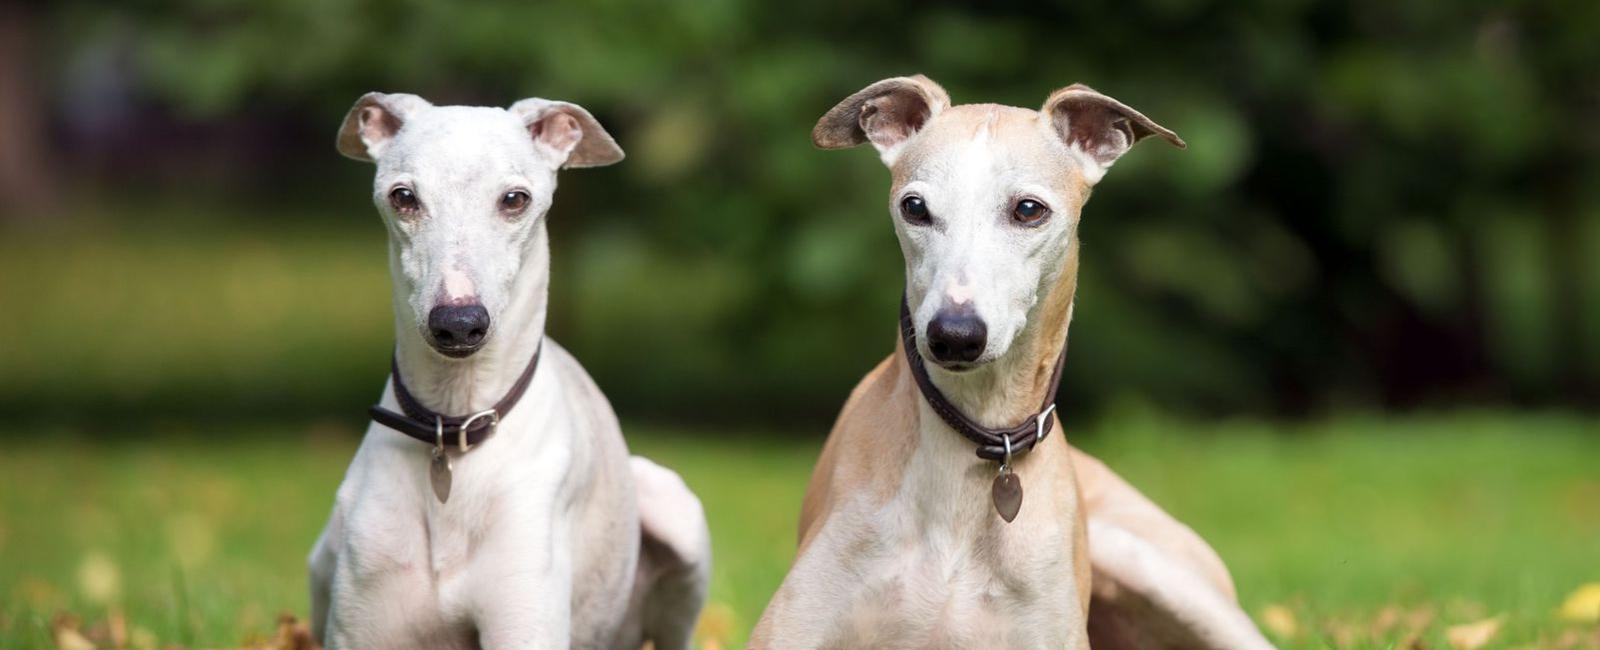 Dog Inbreeding: Can You Breed Sibling Dogs?